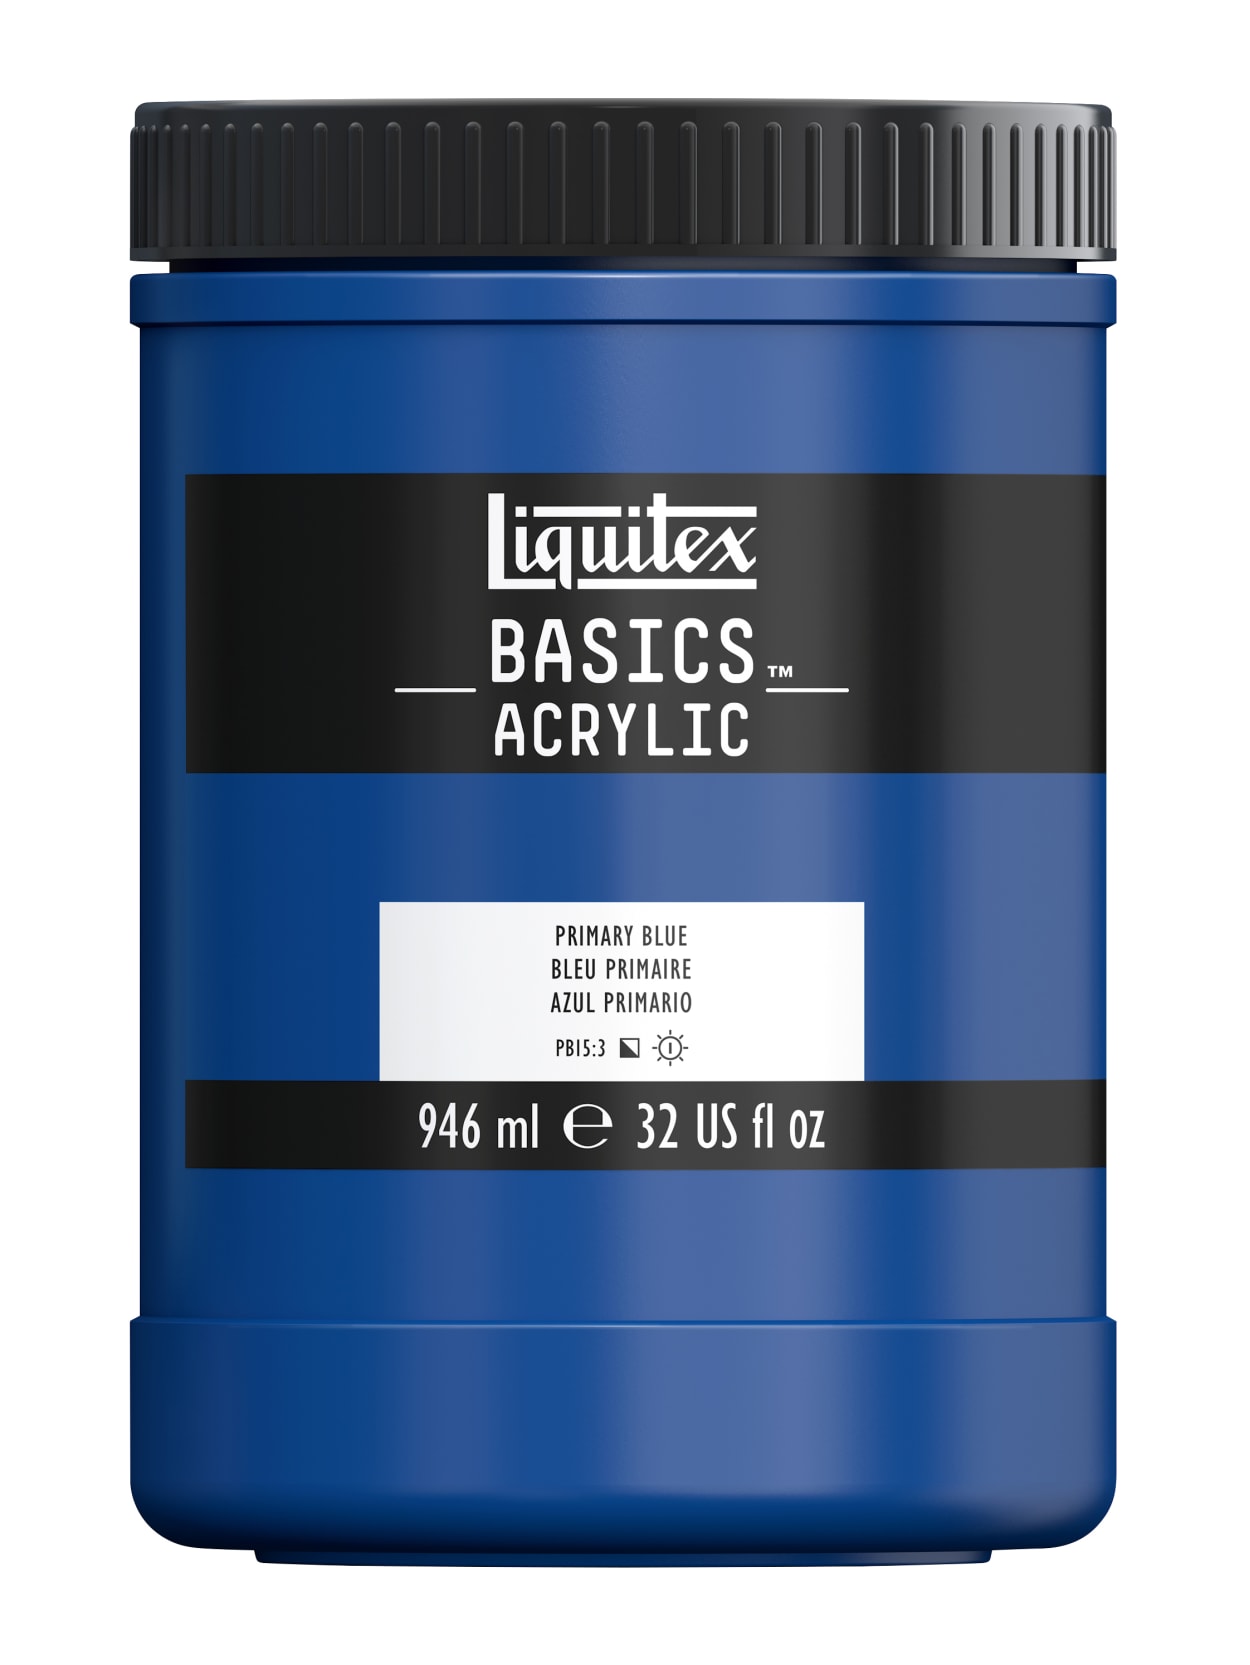 Support Faq Your Business Where Can I Obtain Information About Liquitex